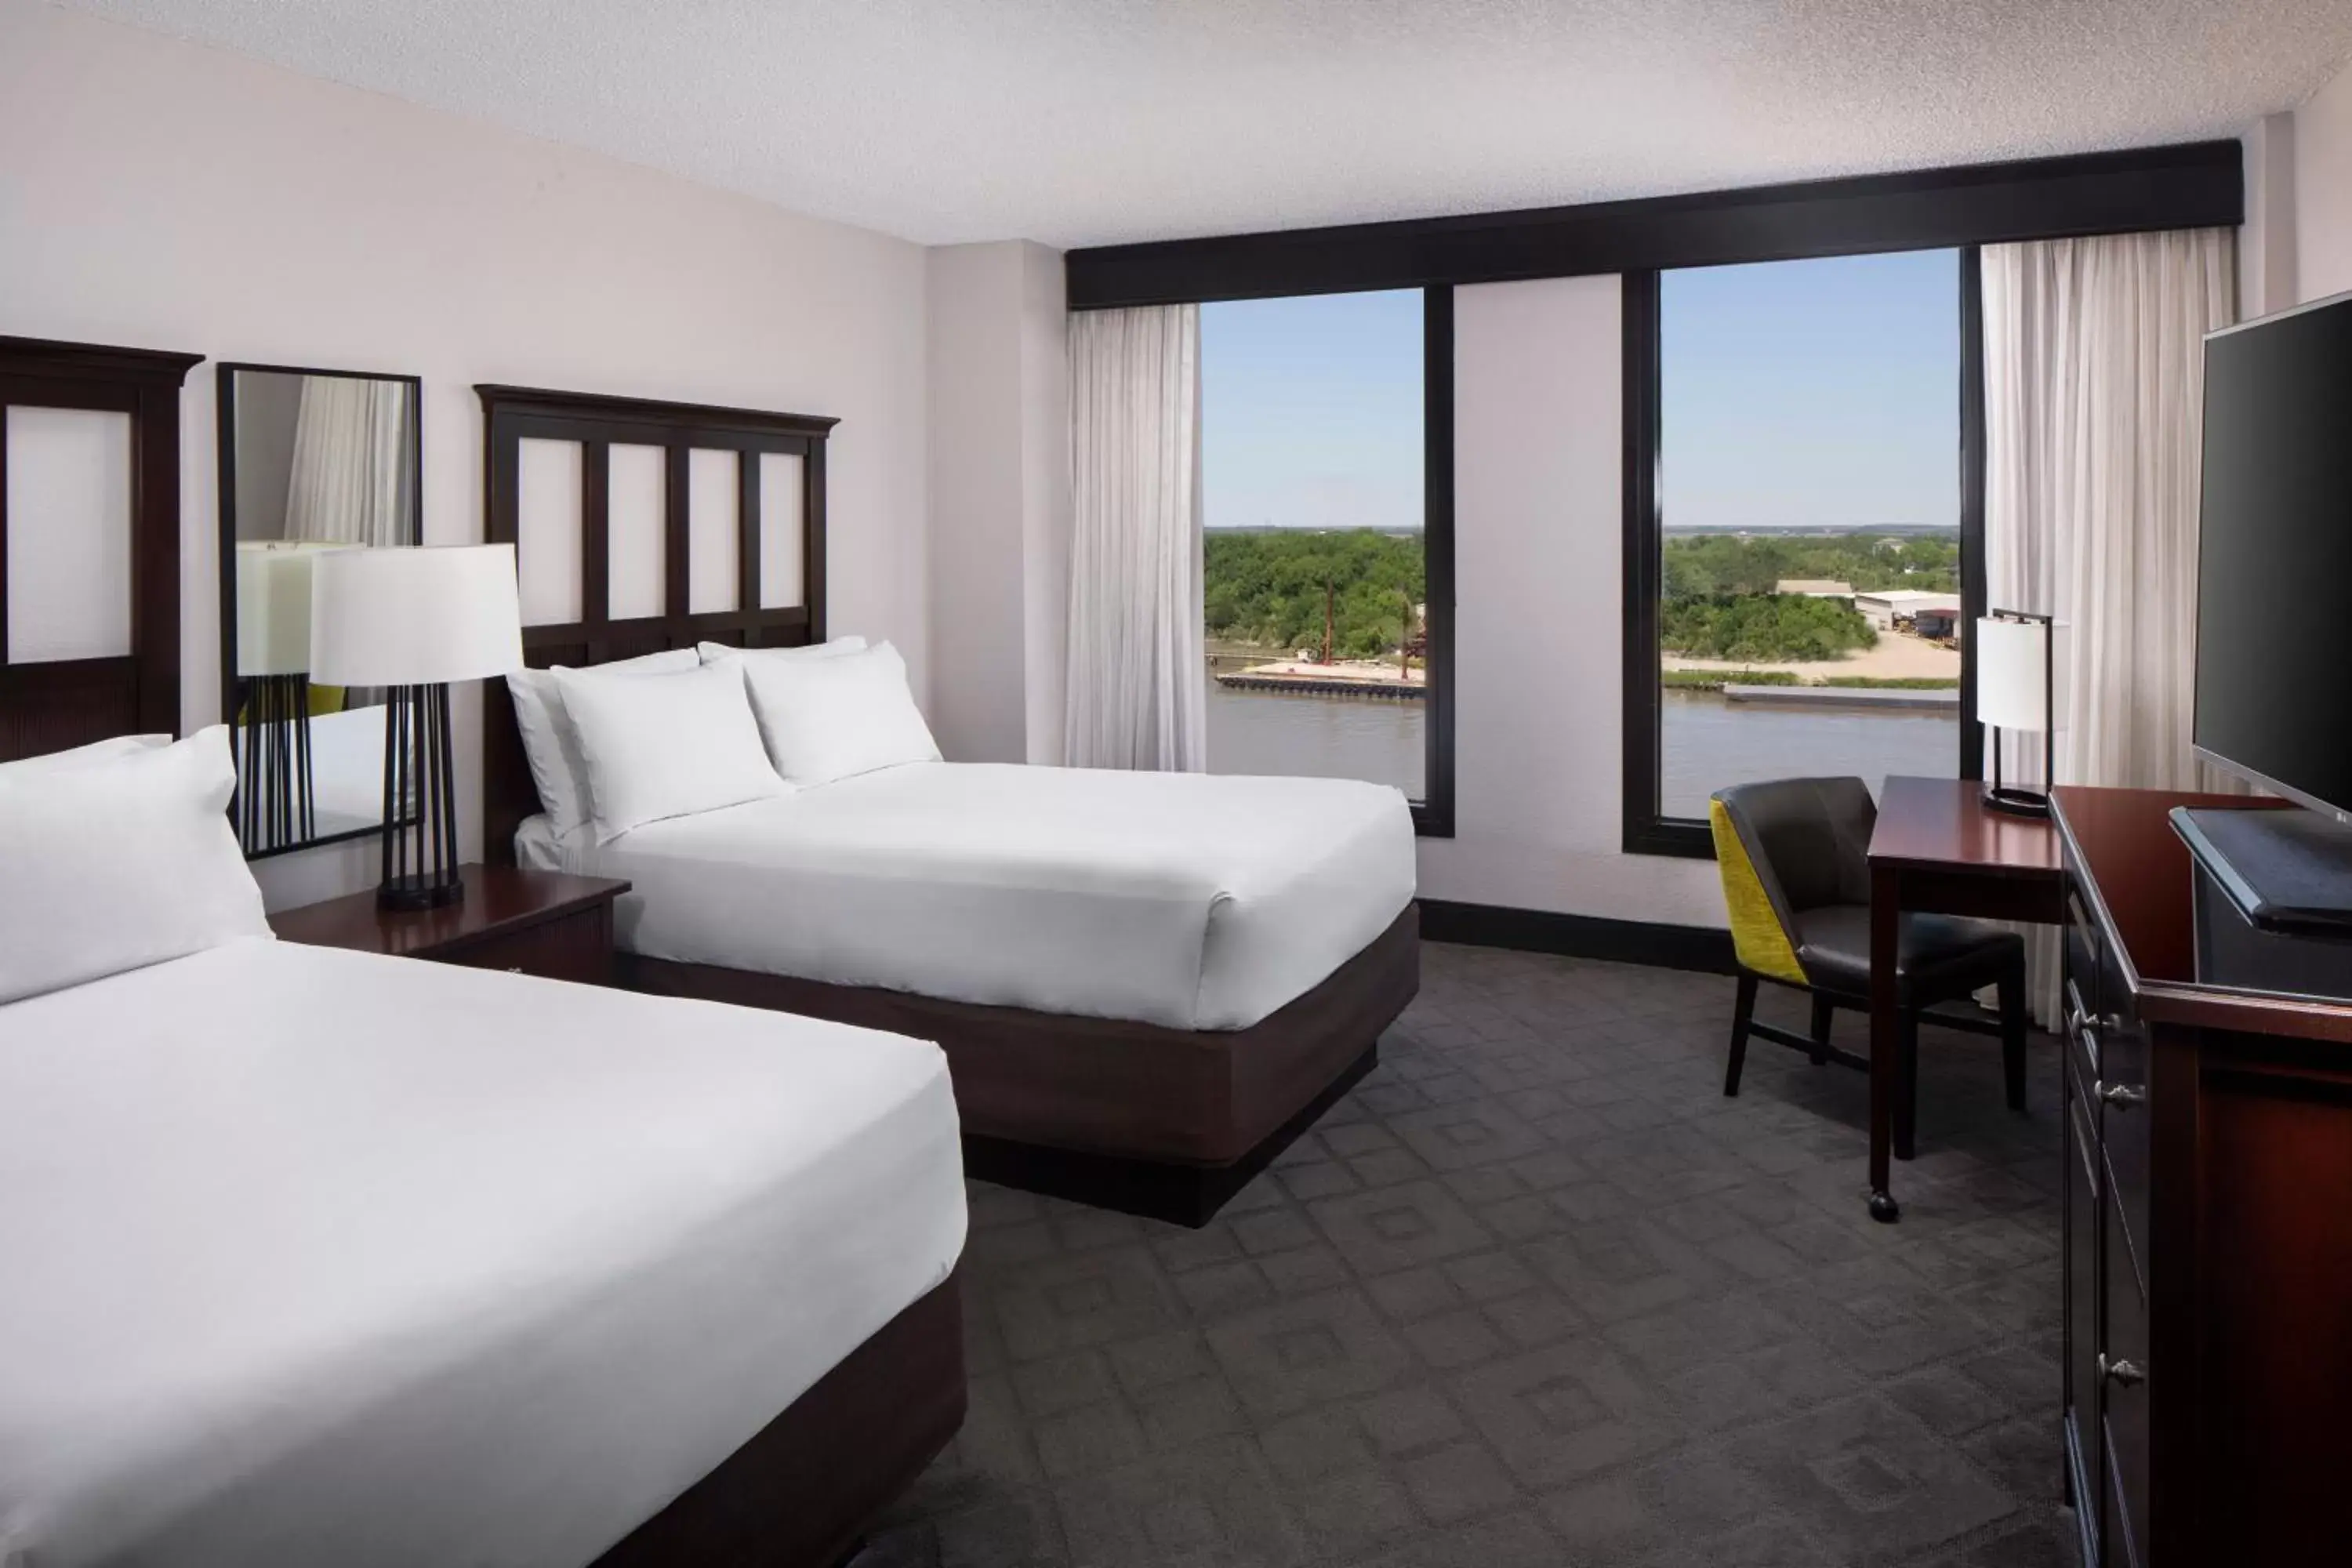 Double Room with Two Double Beds and River View in Hyatt Regency Savannah